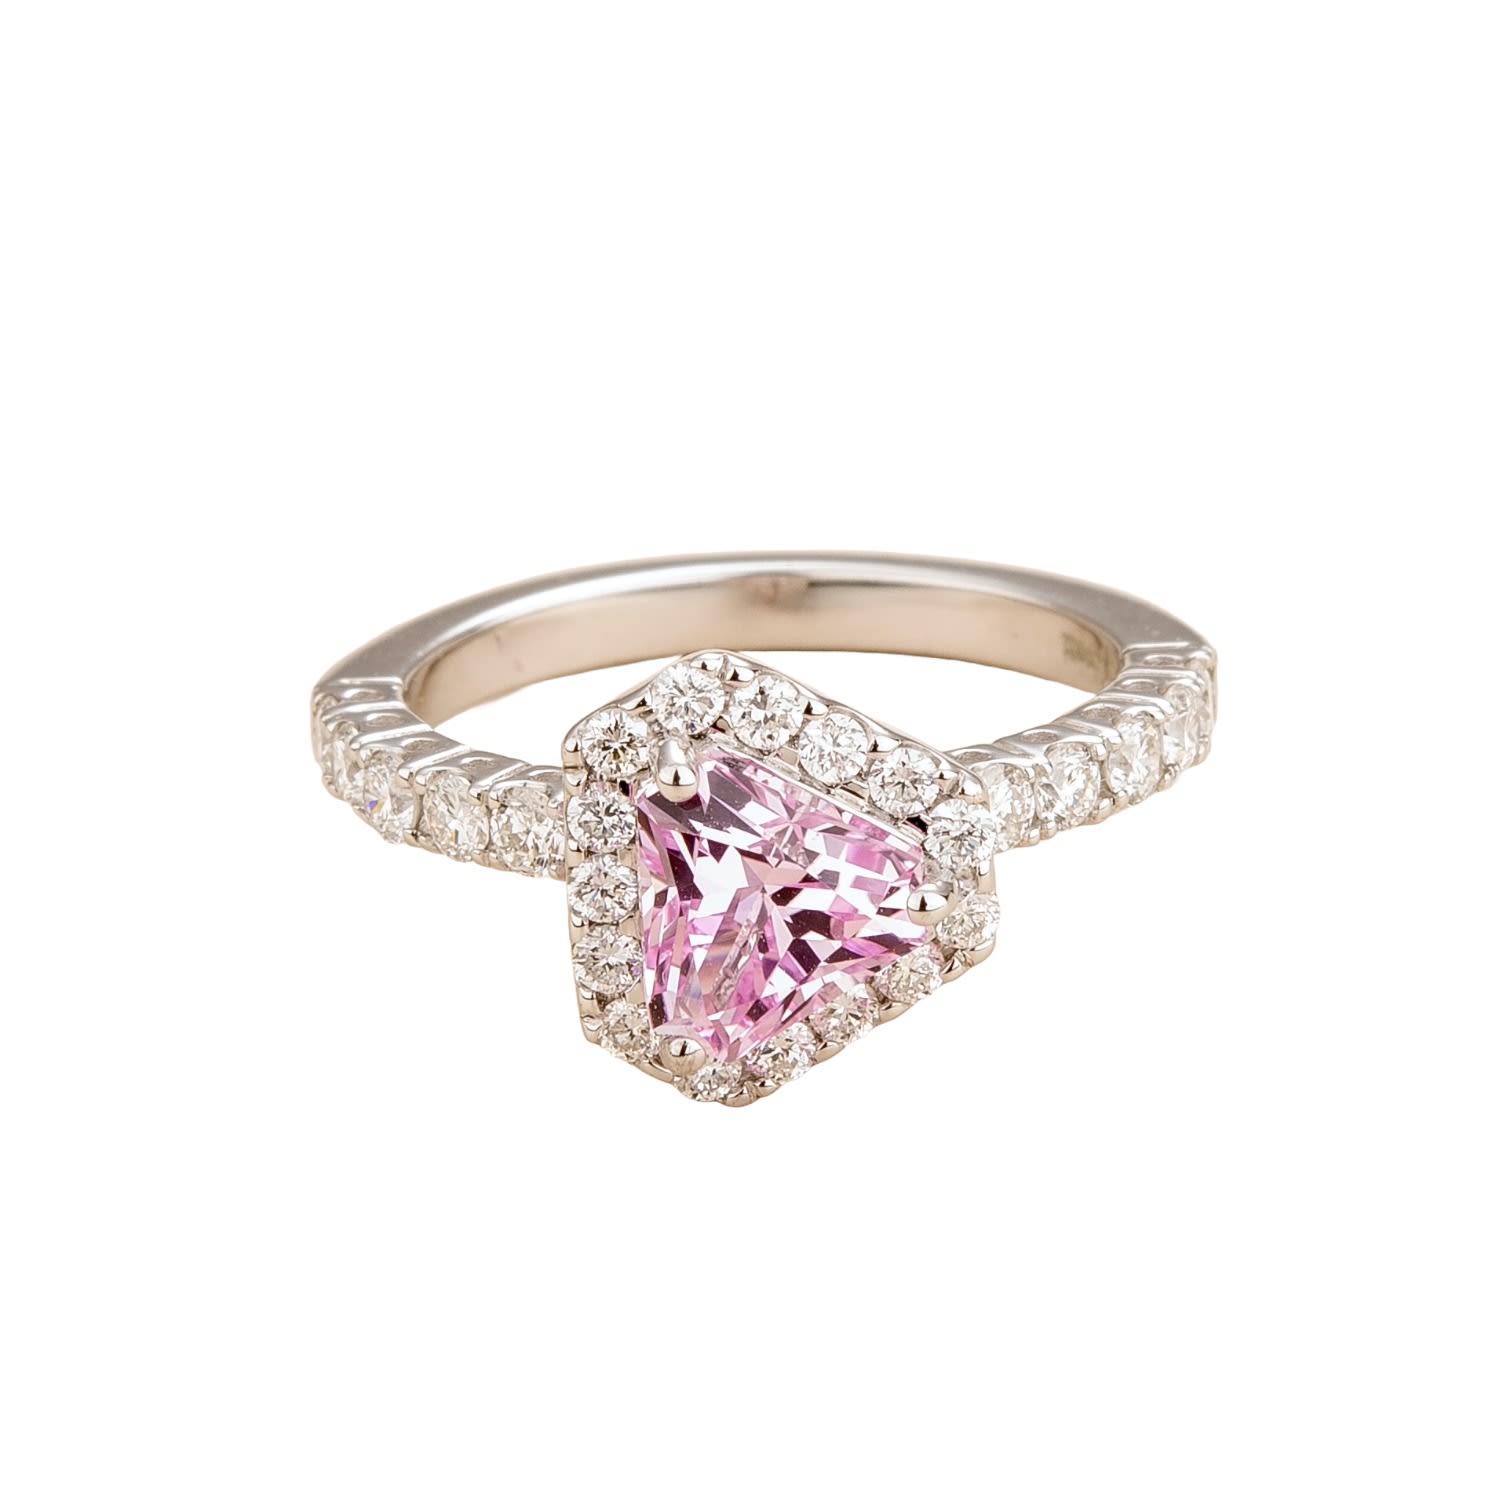 Juvetti Women's White / Pink / Purple Diana Ring With Pink Sapphire And Diamonds Set In White Gold